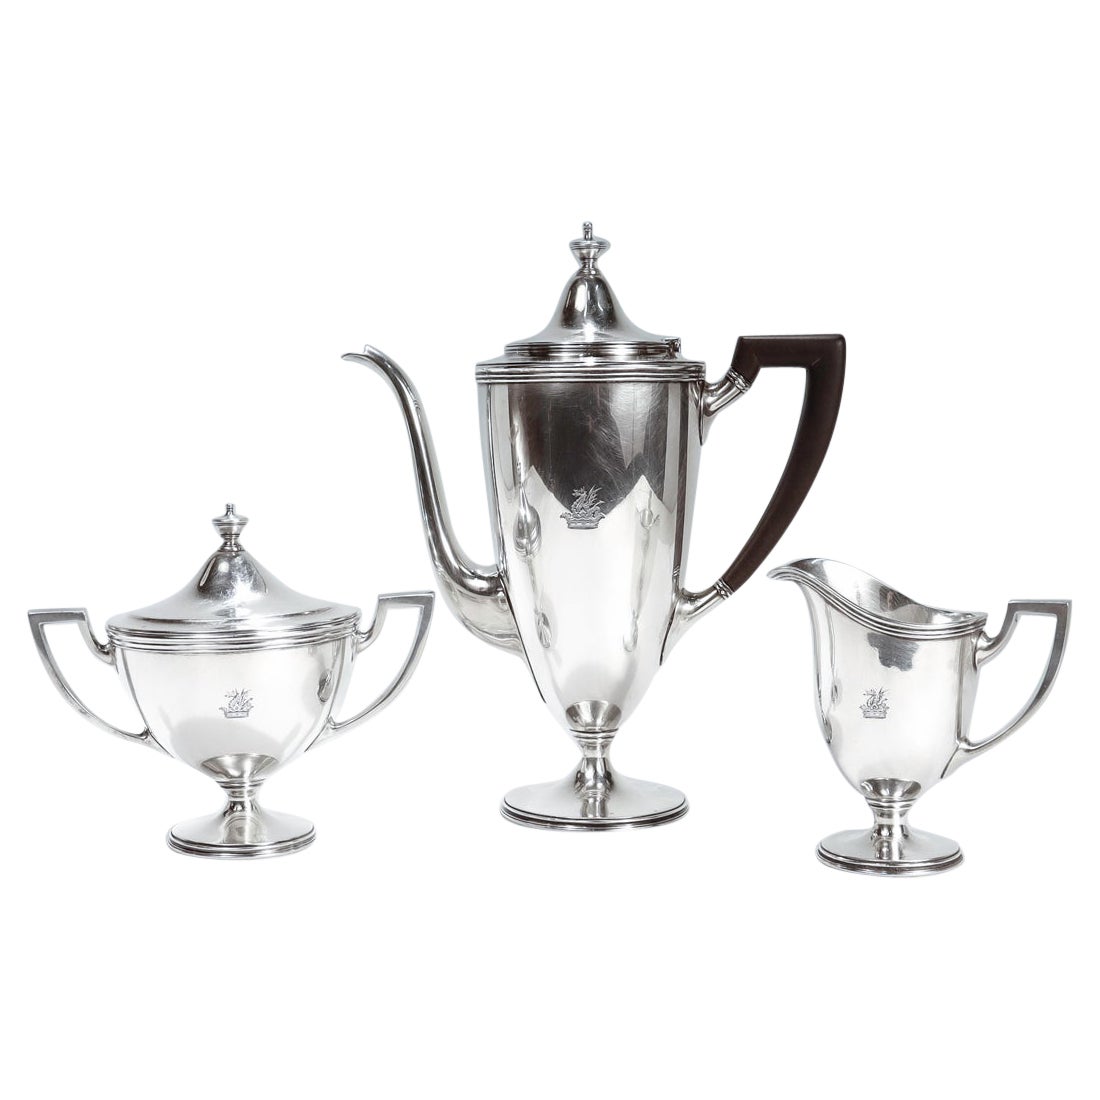 Antique Crested Tiffany & Co Sterling Silver Tea or Coffee Set